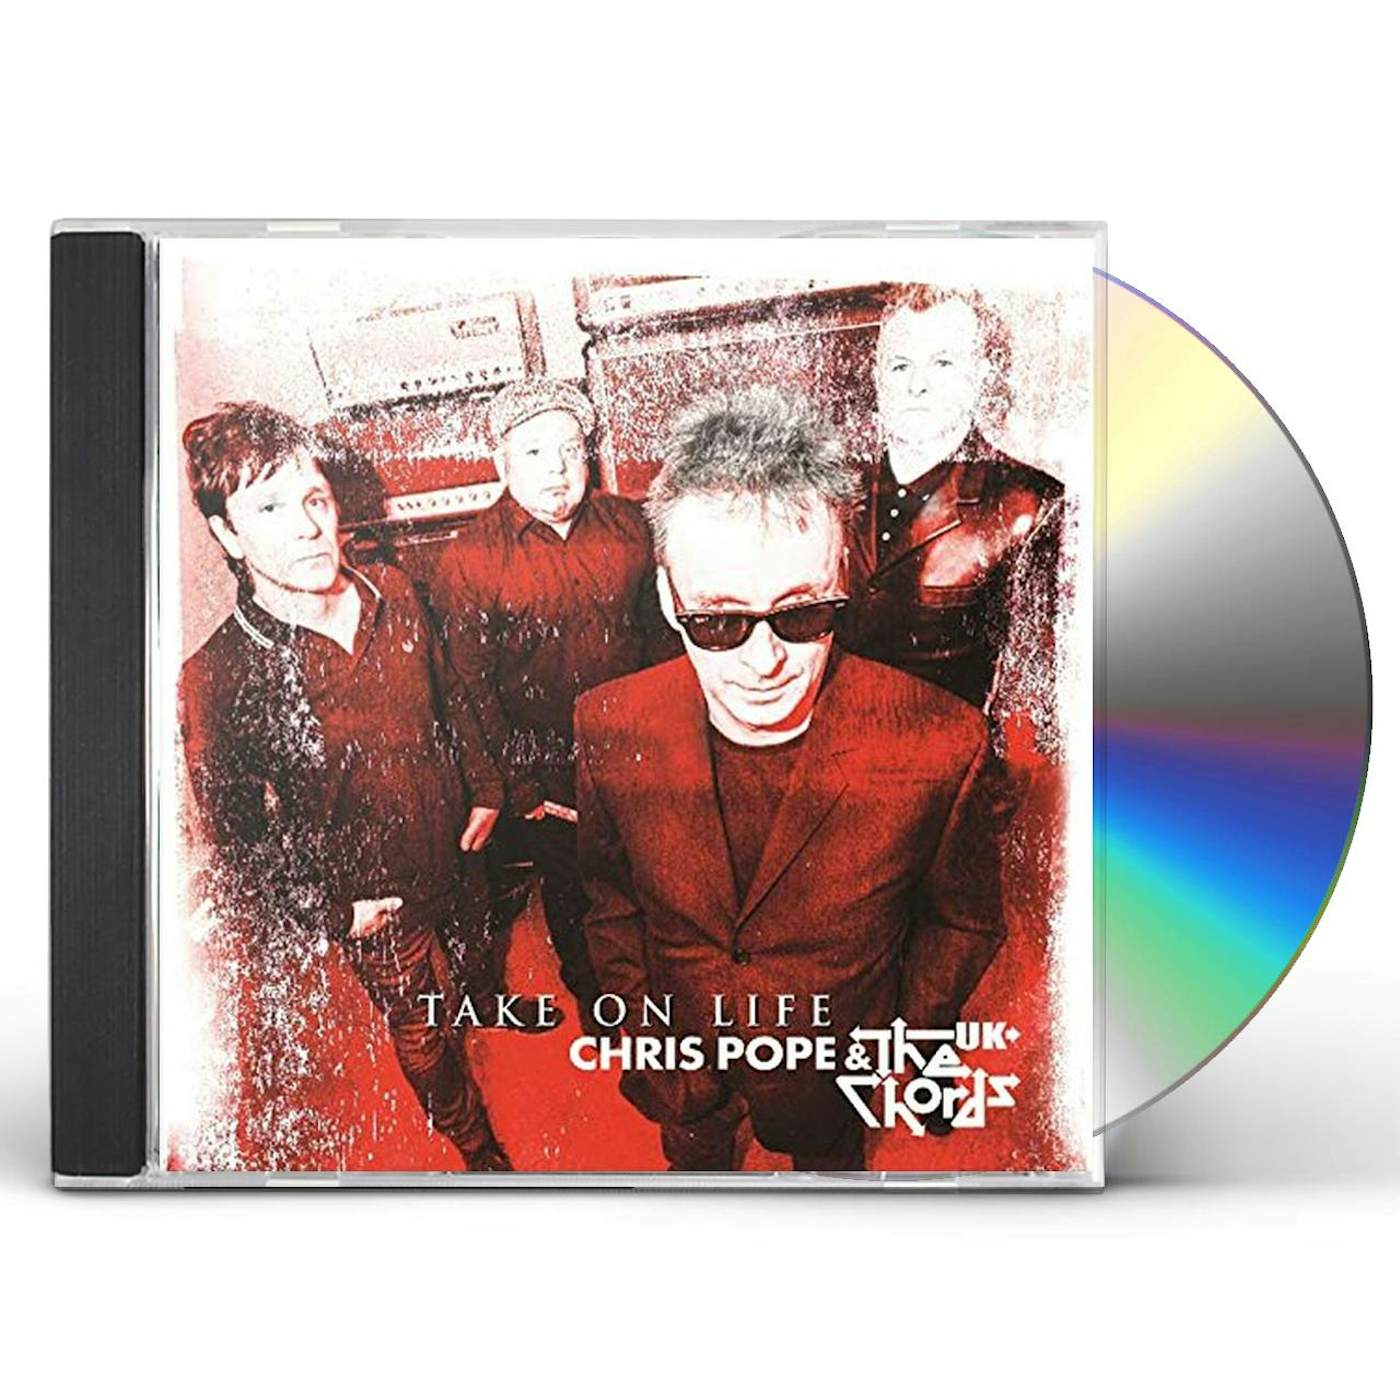 Chris Pope & The Chords TAKE ON LIFE CD